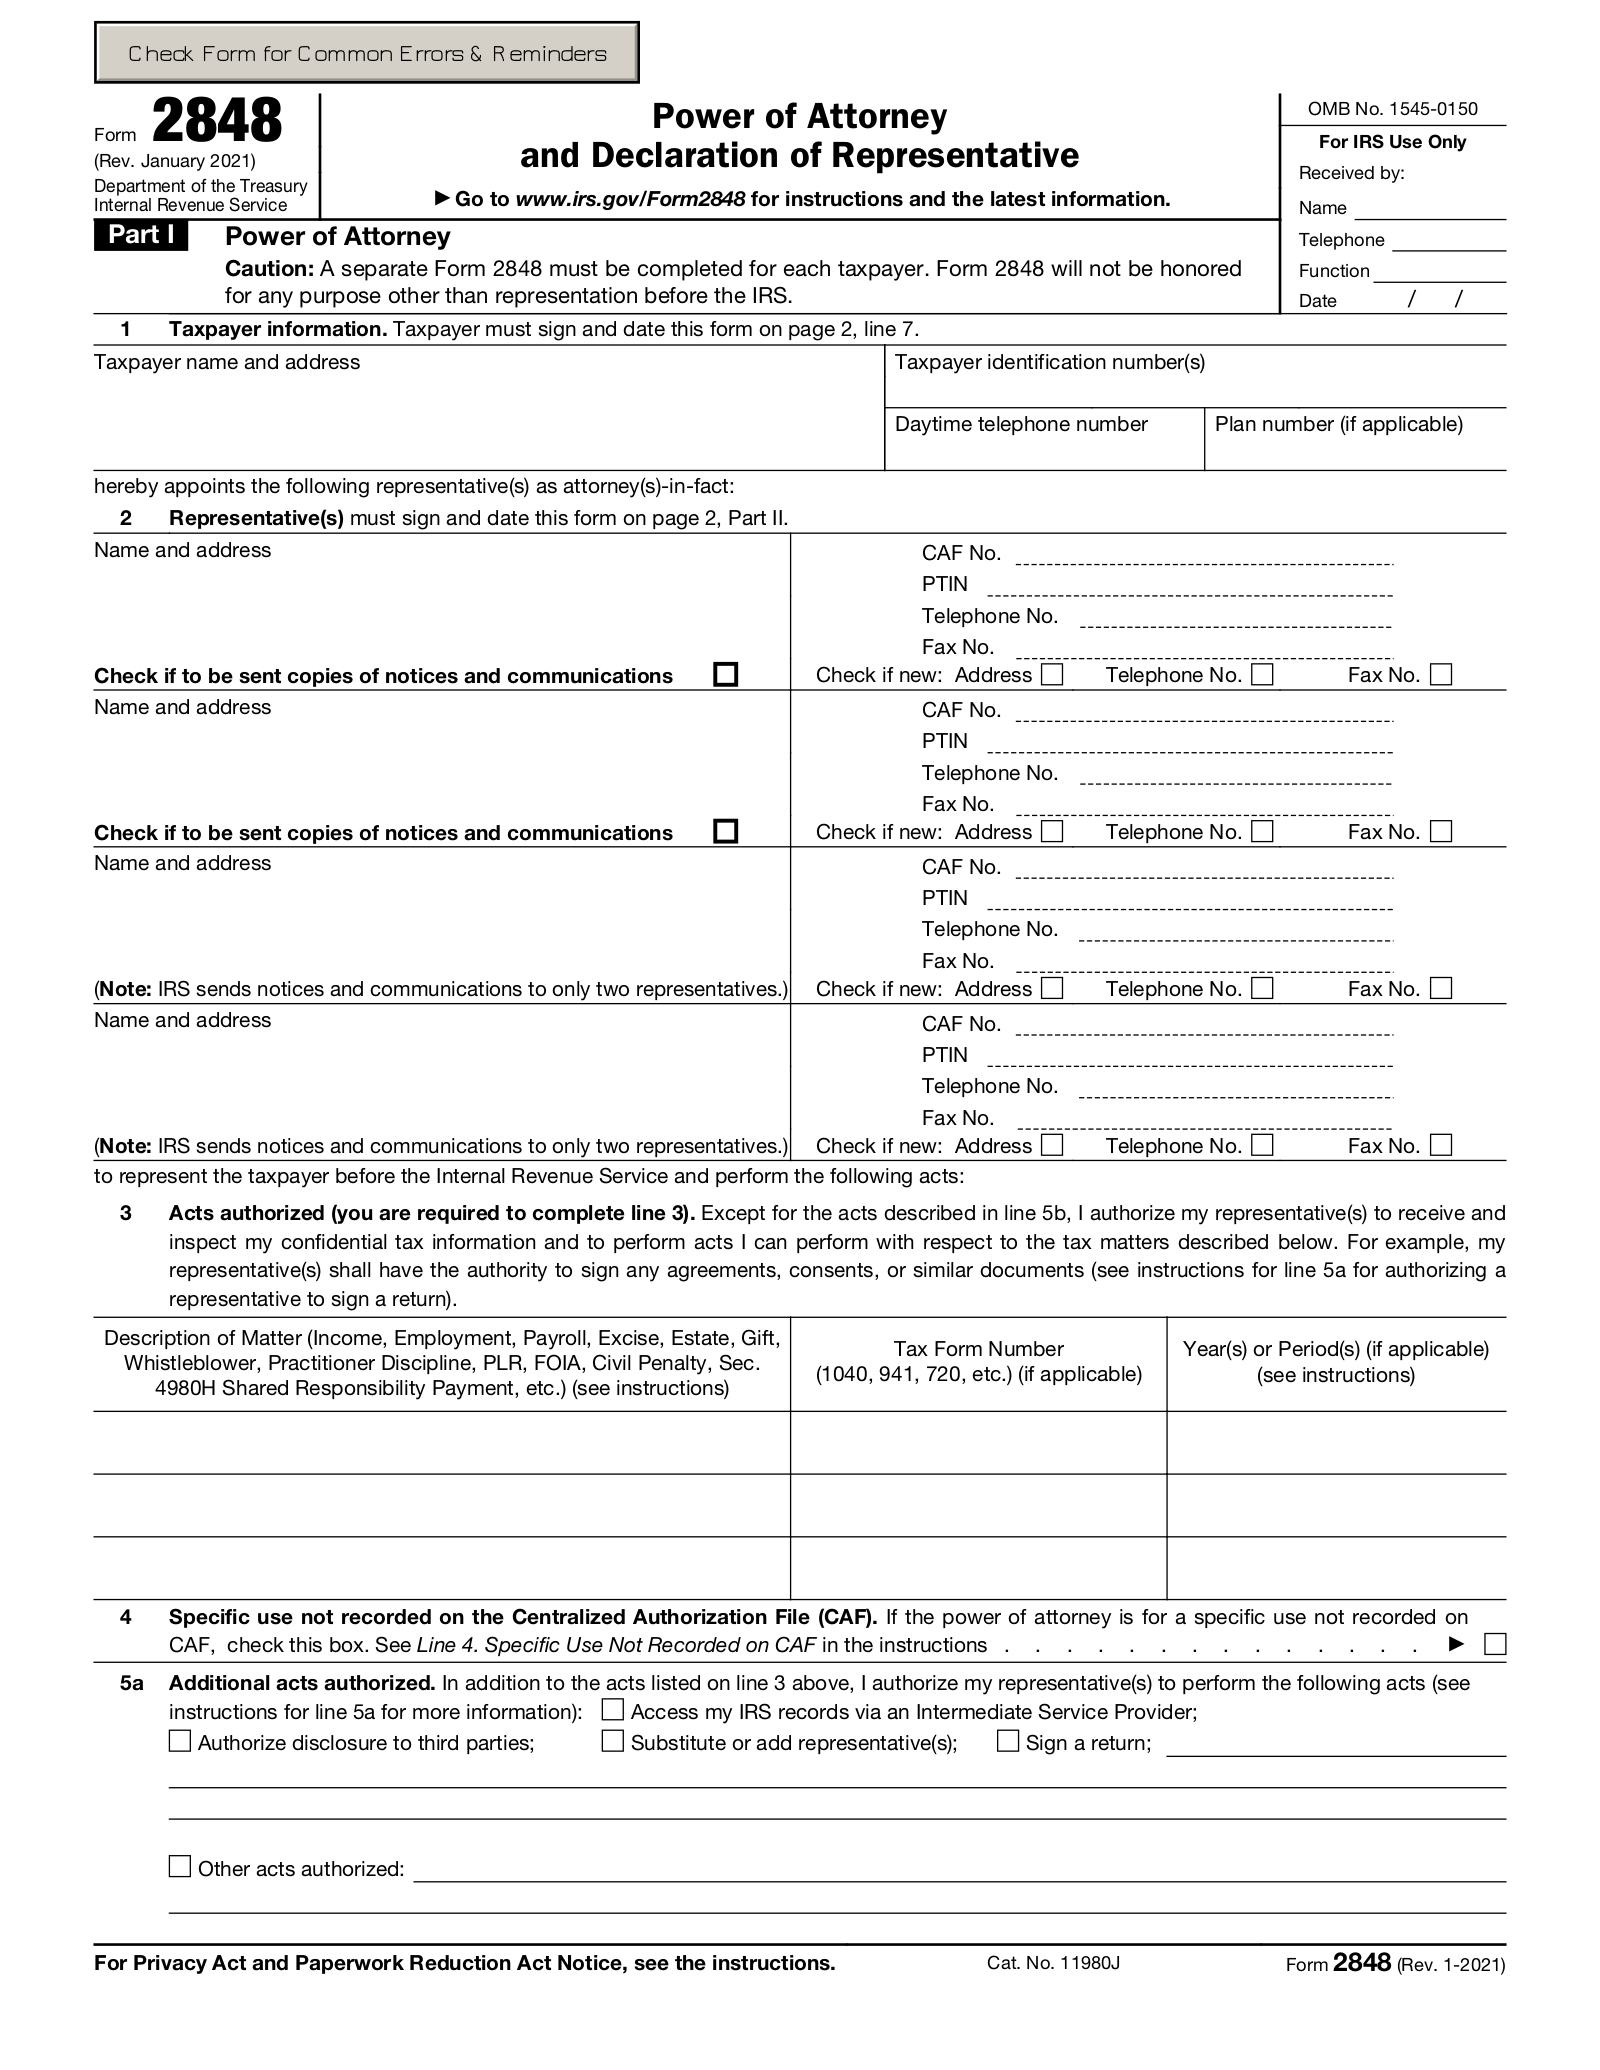 IRS Power of Attorney Form 2848 | Revised Jan. 2021